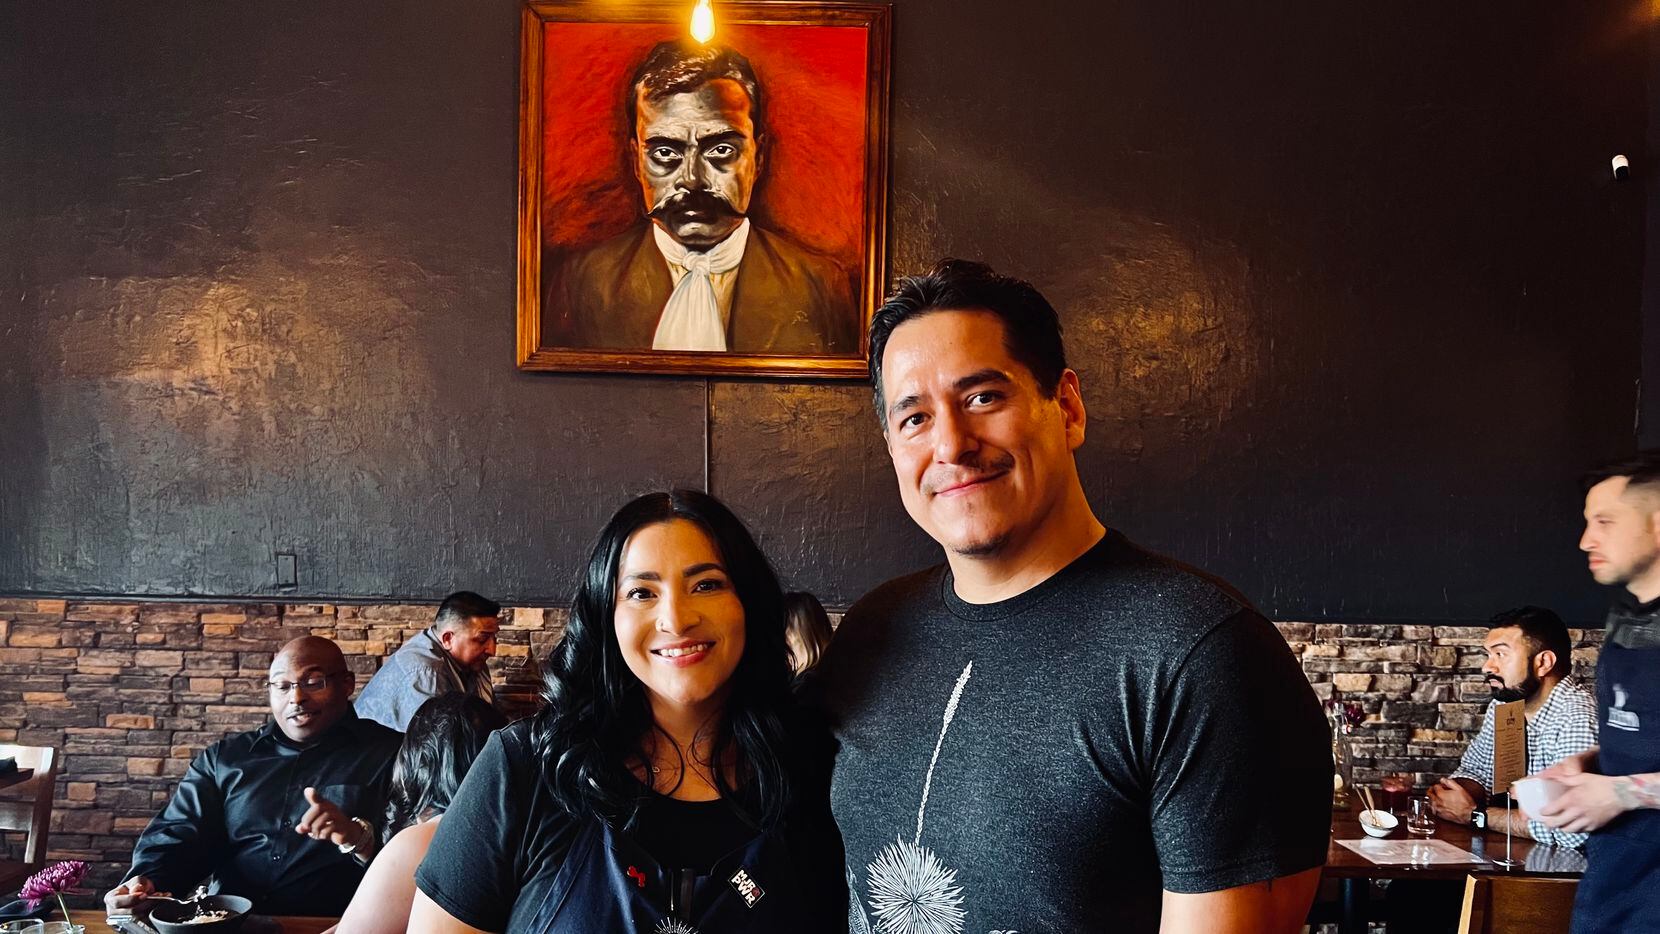 Emilio Marentes and his wife Krystal Marentes operate the restaurant Elemi, a tiny eatery...